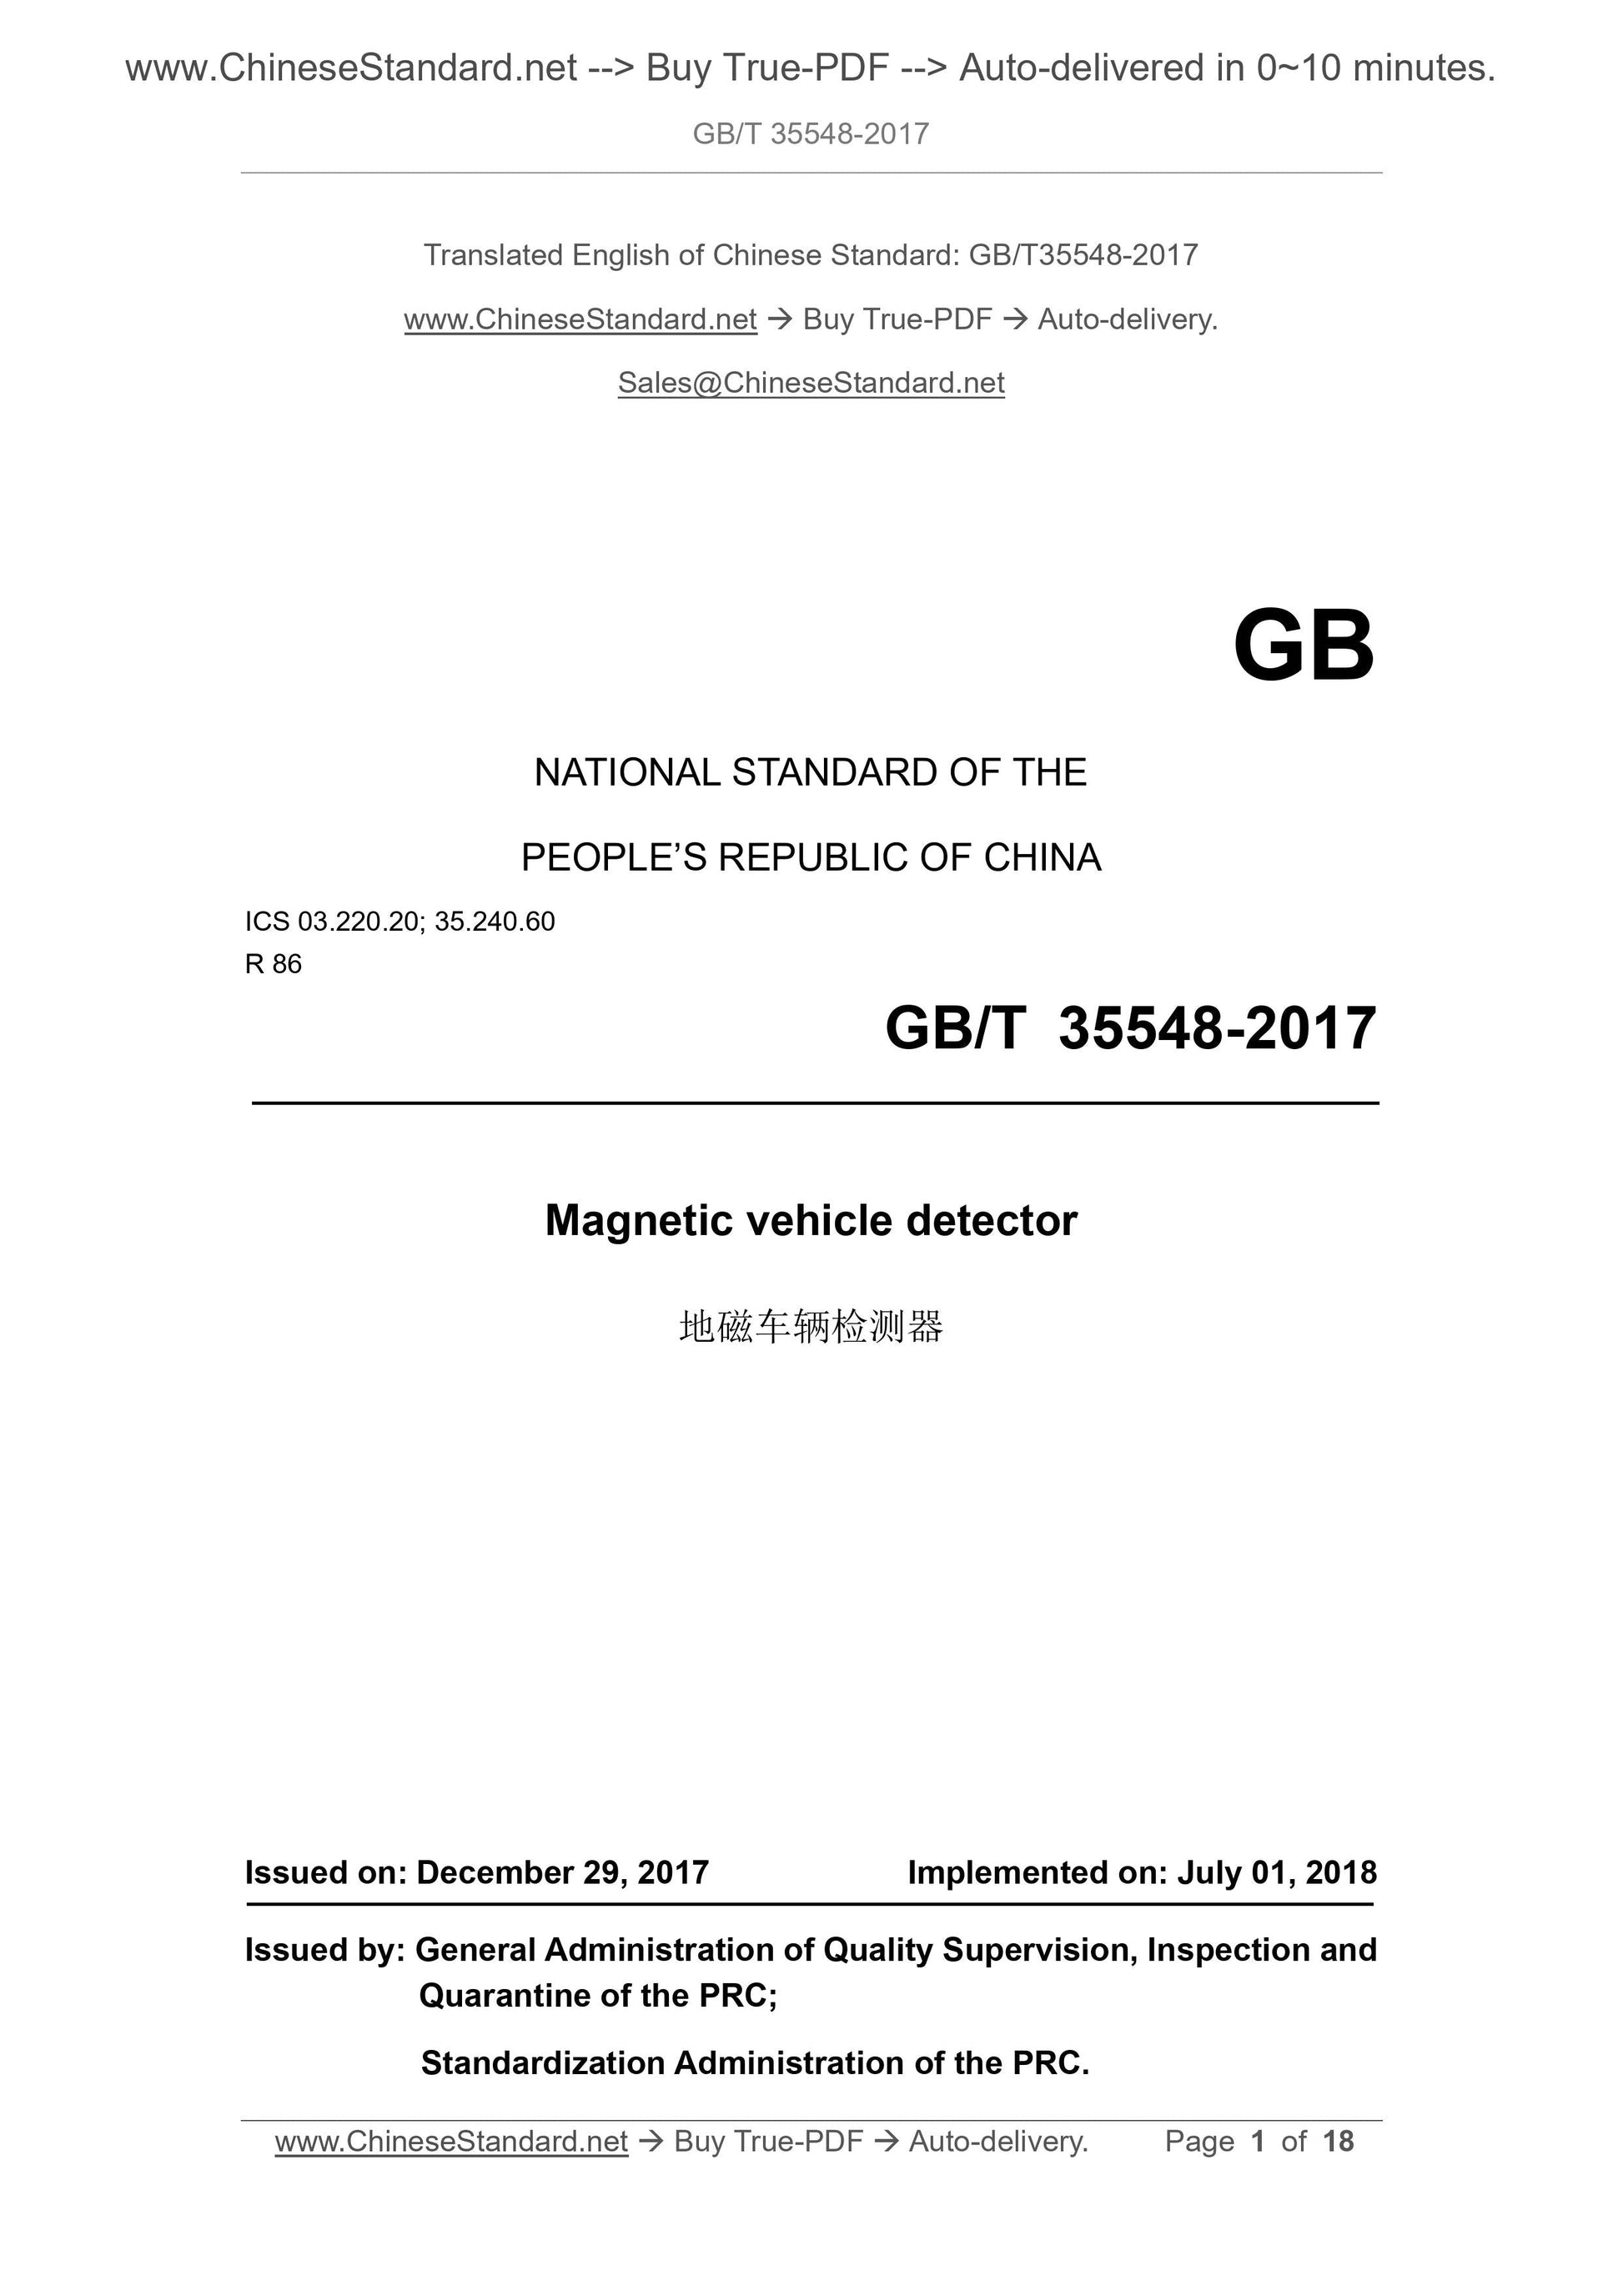 GB/T 35548-2017 Page 1